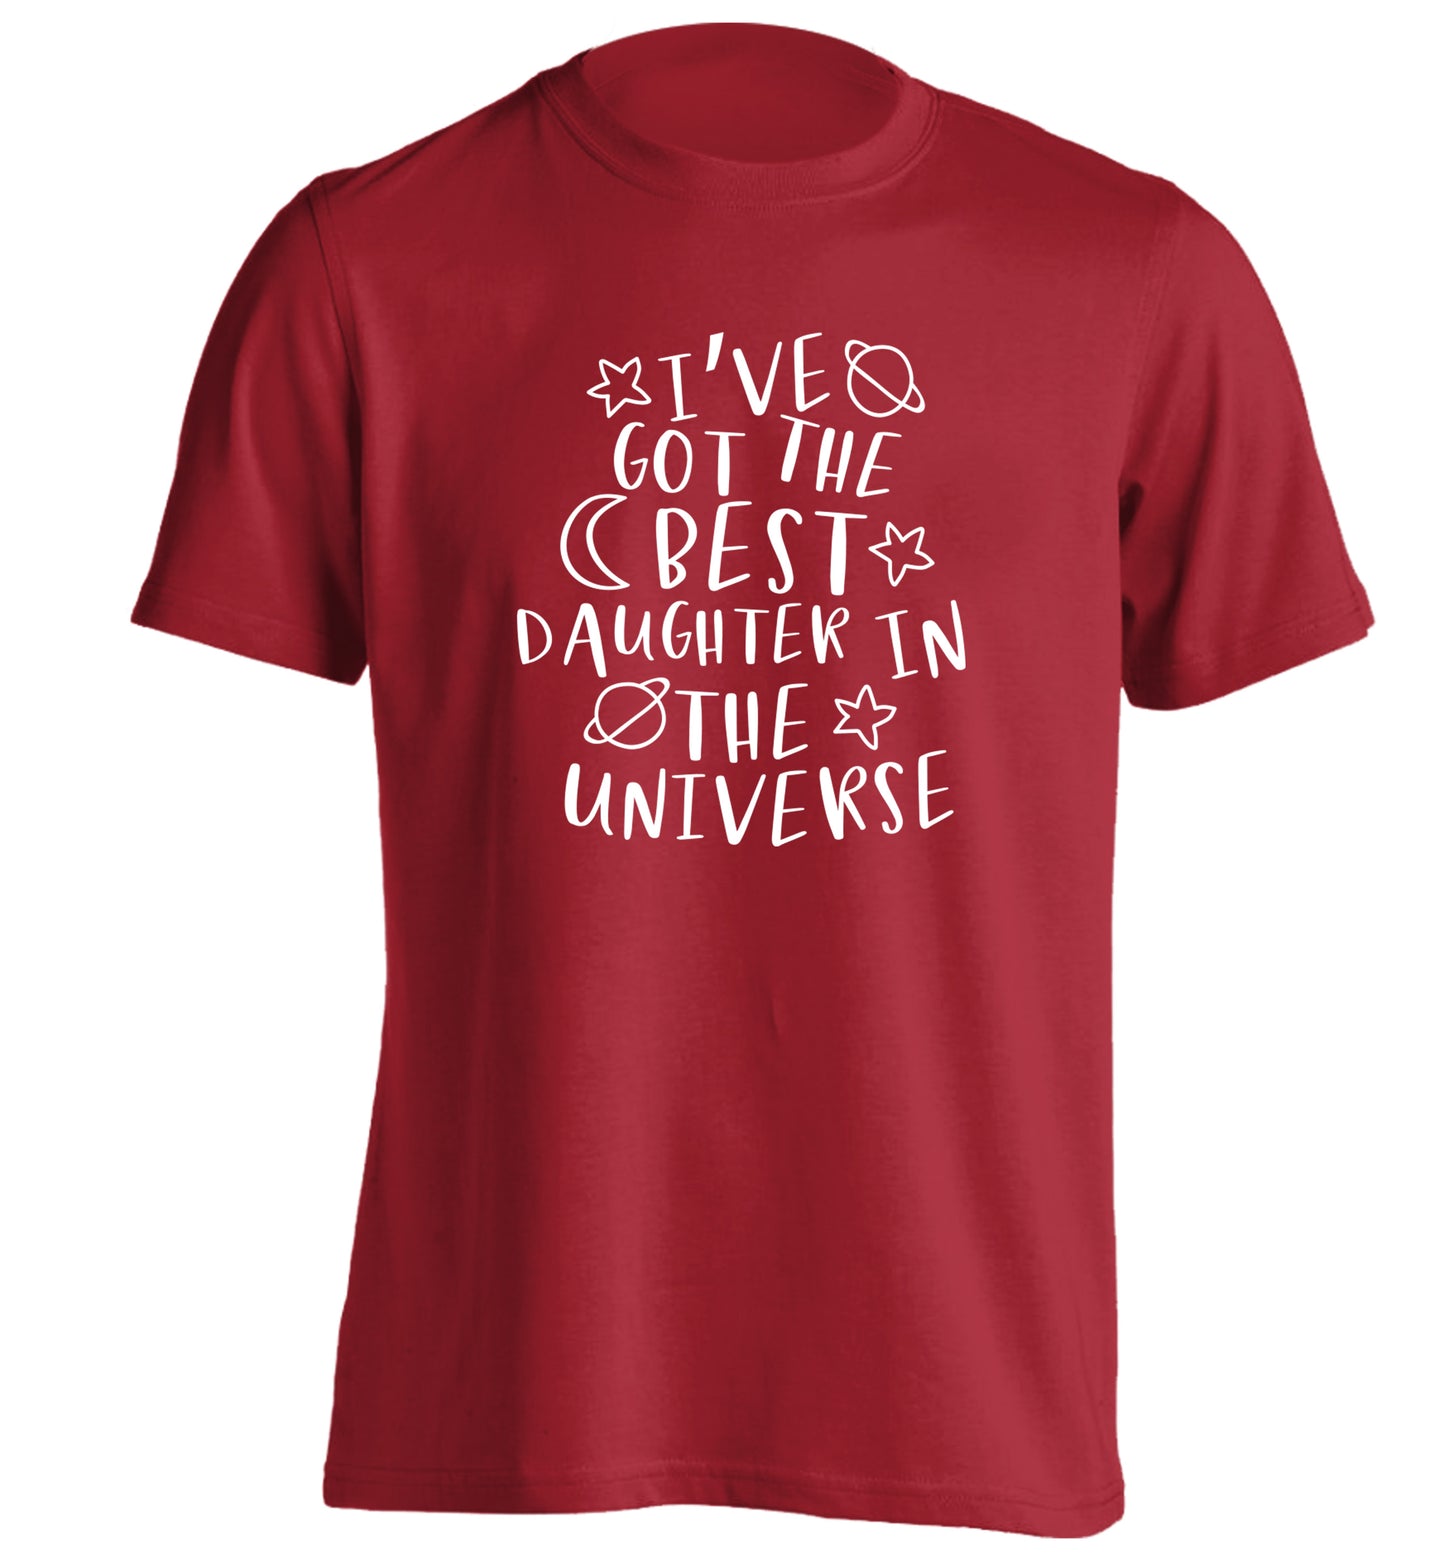 I've got the best daughter in the universe adults unisex red Tshirt 2XL